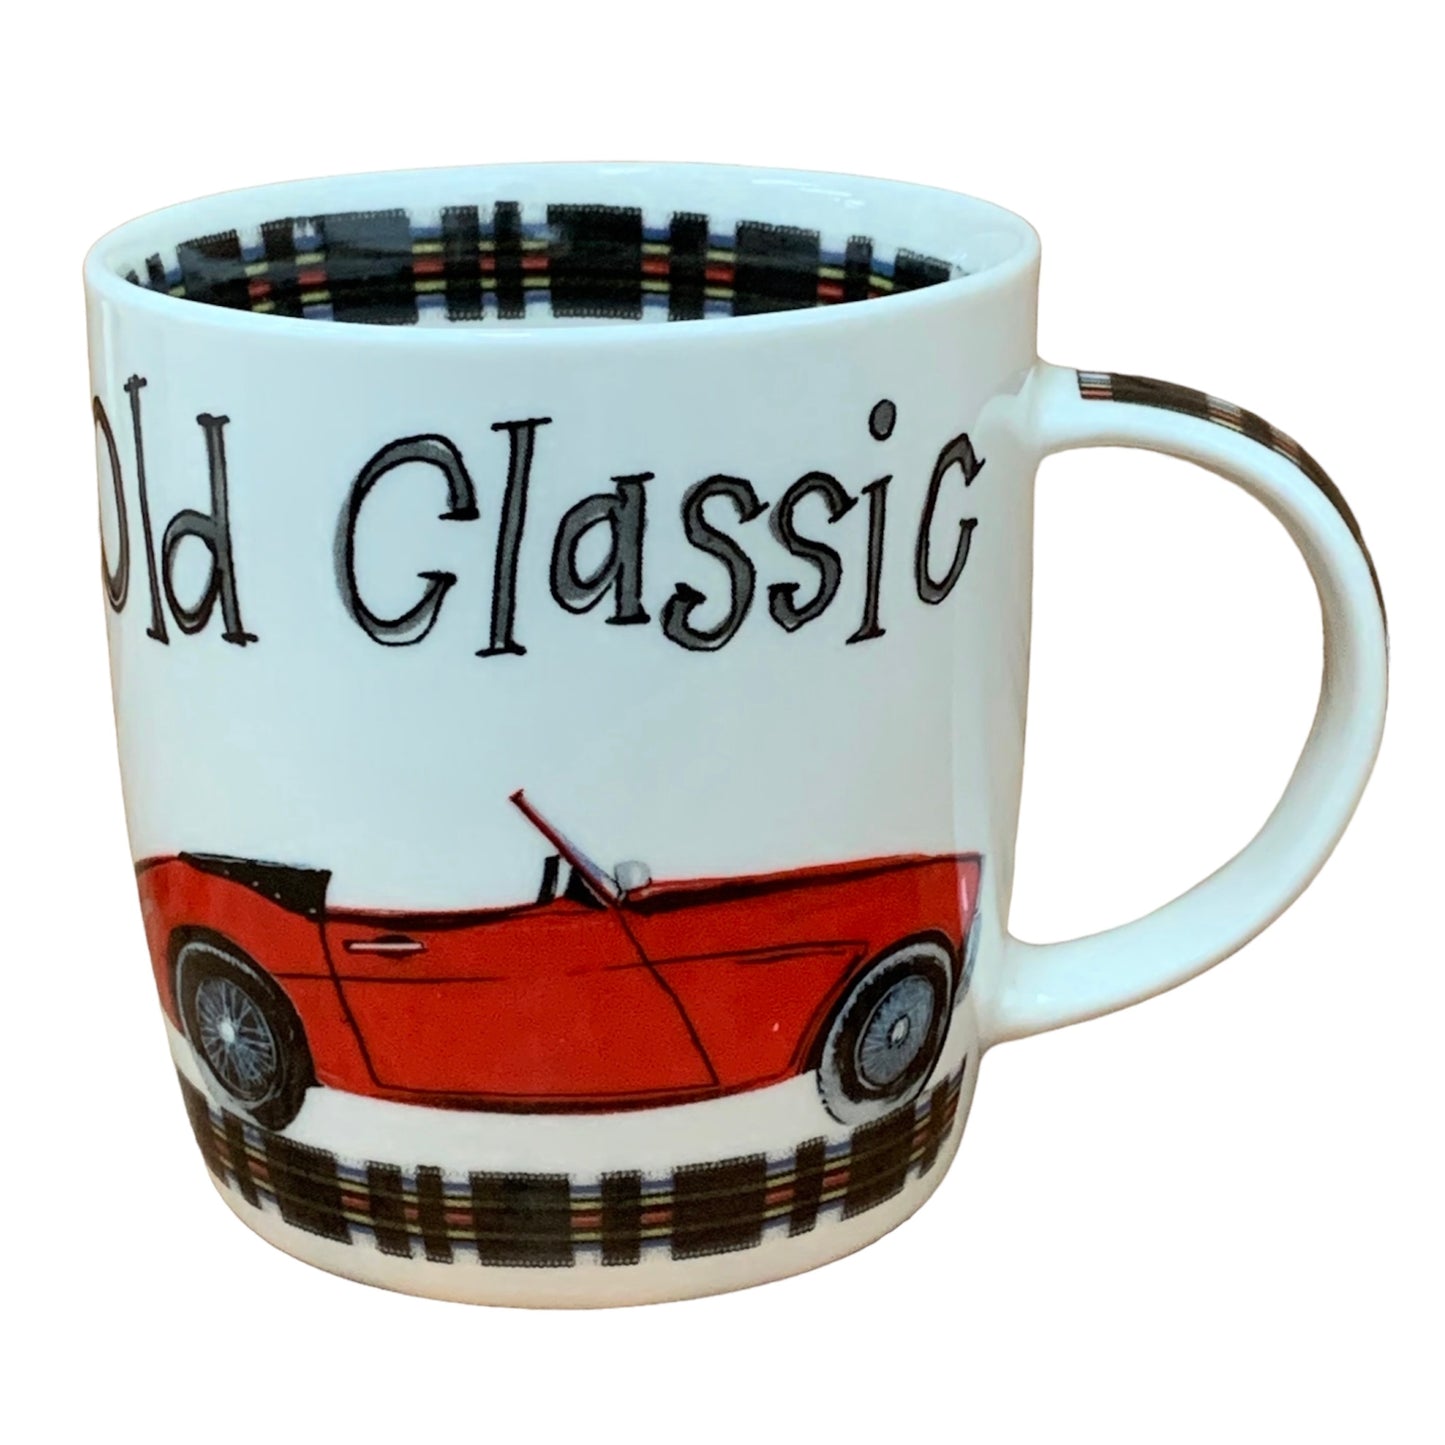 This Alex Clark mug is illustrated with a red classic car with the wording Old Classic written on the top of the mug.  This mug also features a tyre illustration around the inside rim & down the handle. 